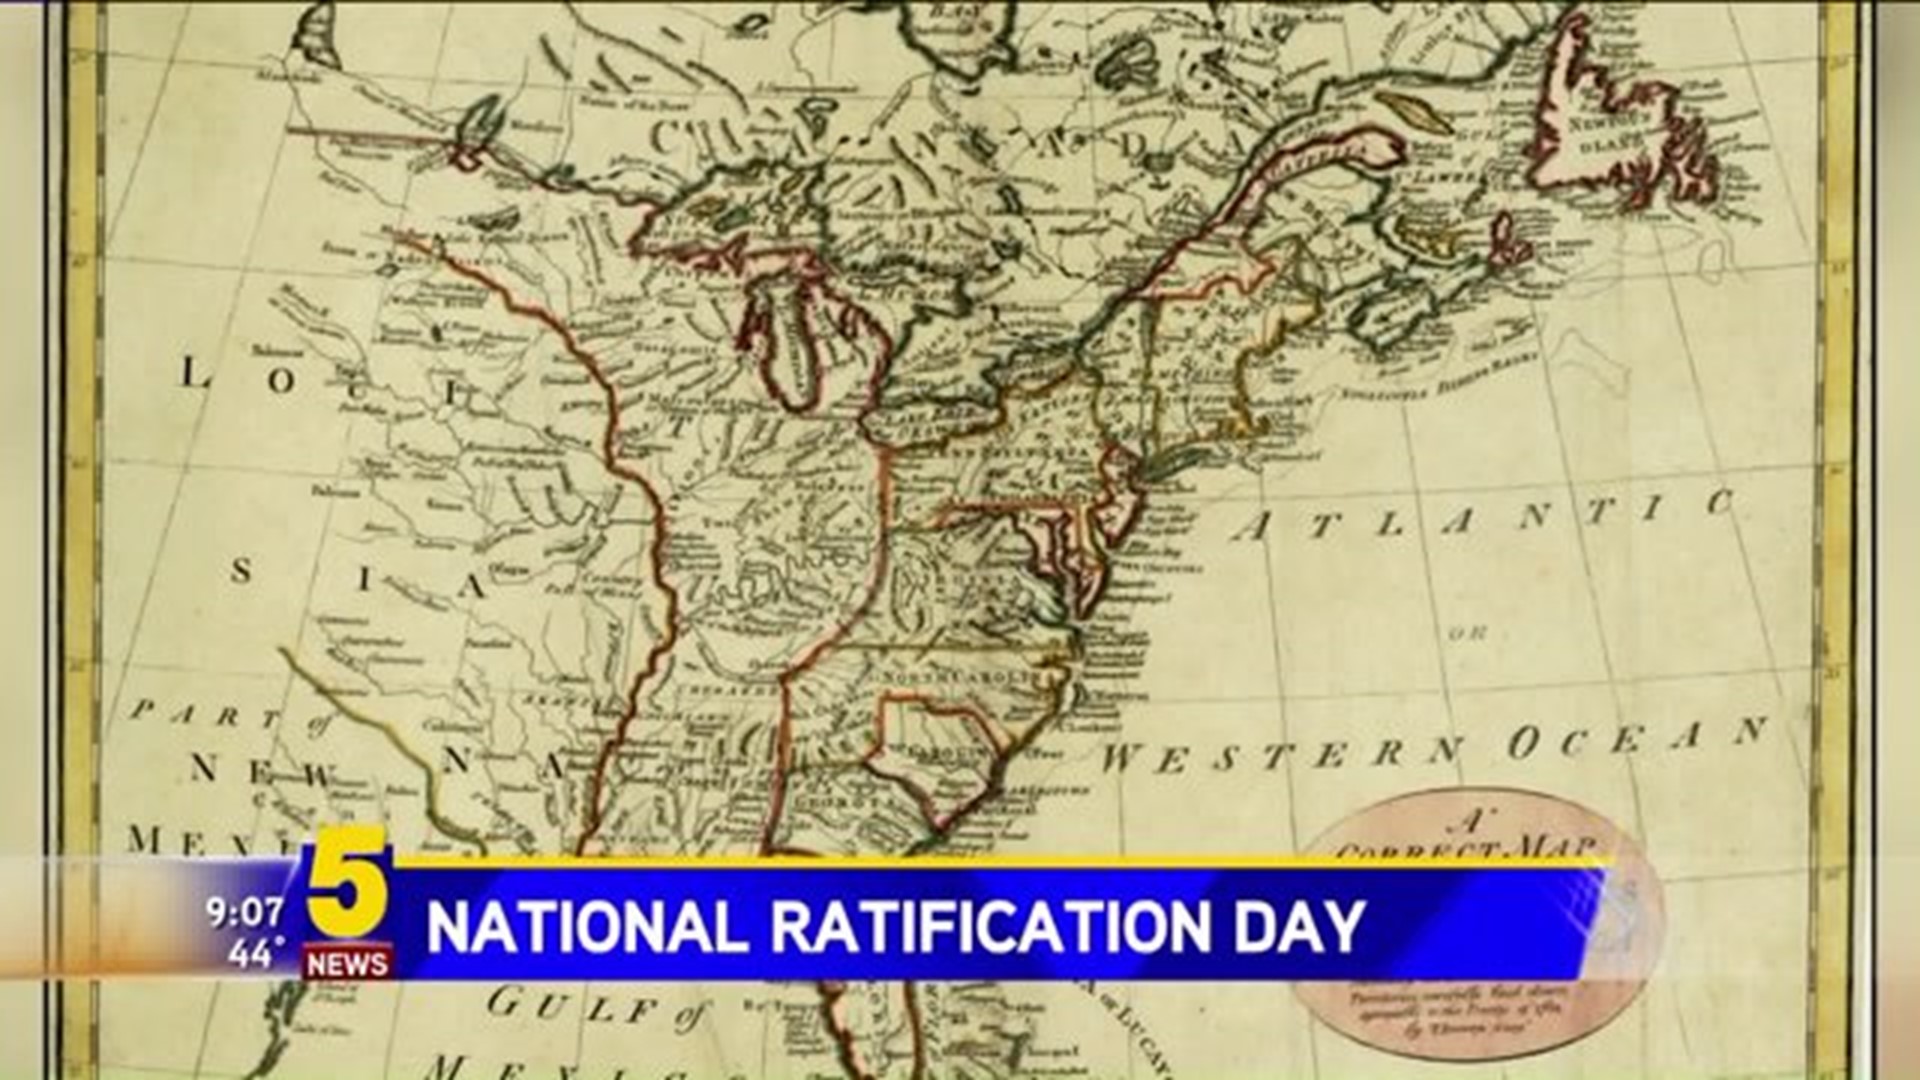 Historian Pays Tribute To "Ratification Day"